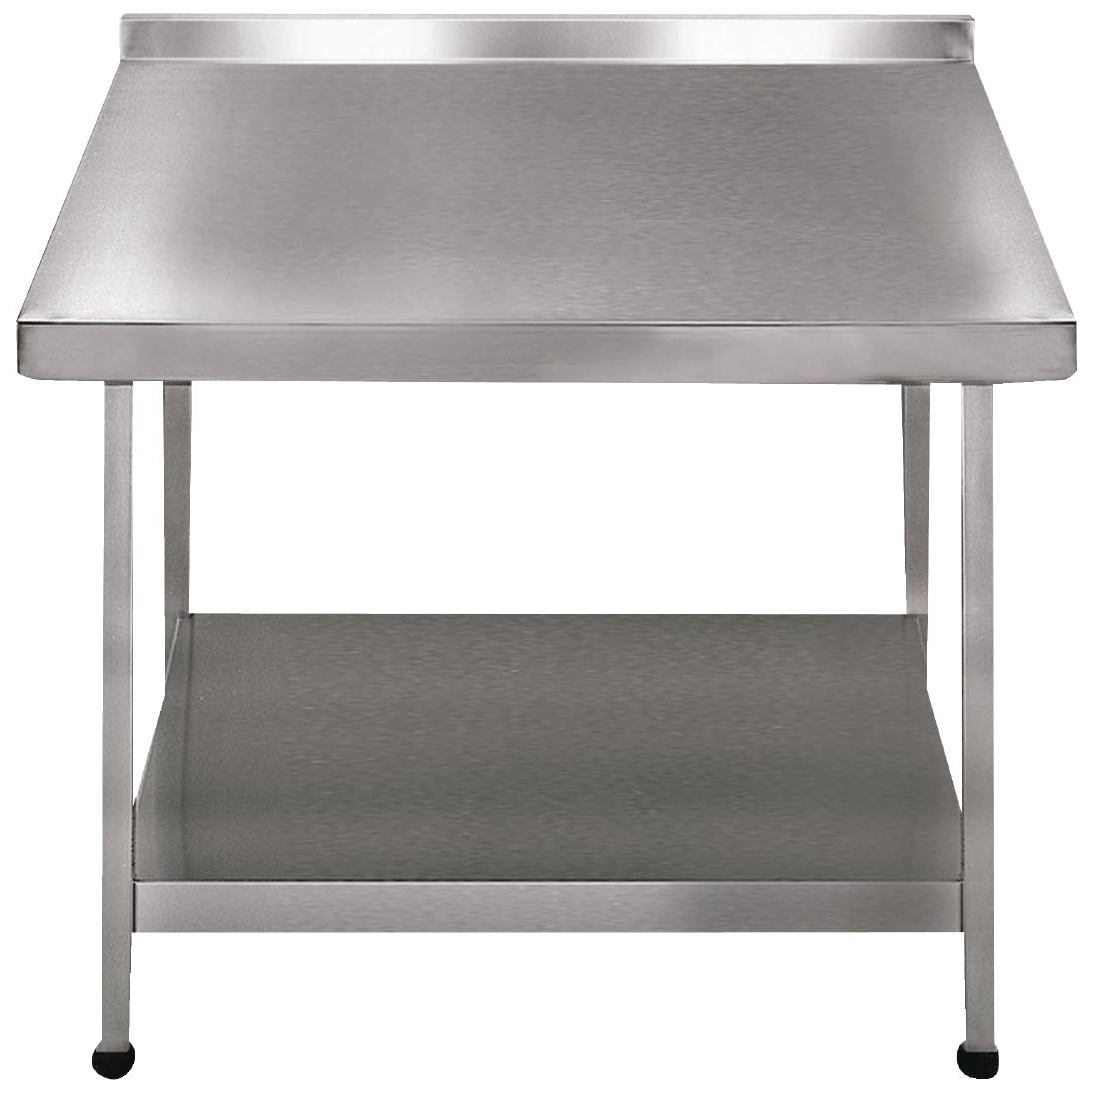 Franke Sissons Stainless Steel Wall Table with Upstand 1800x650mm